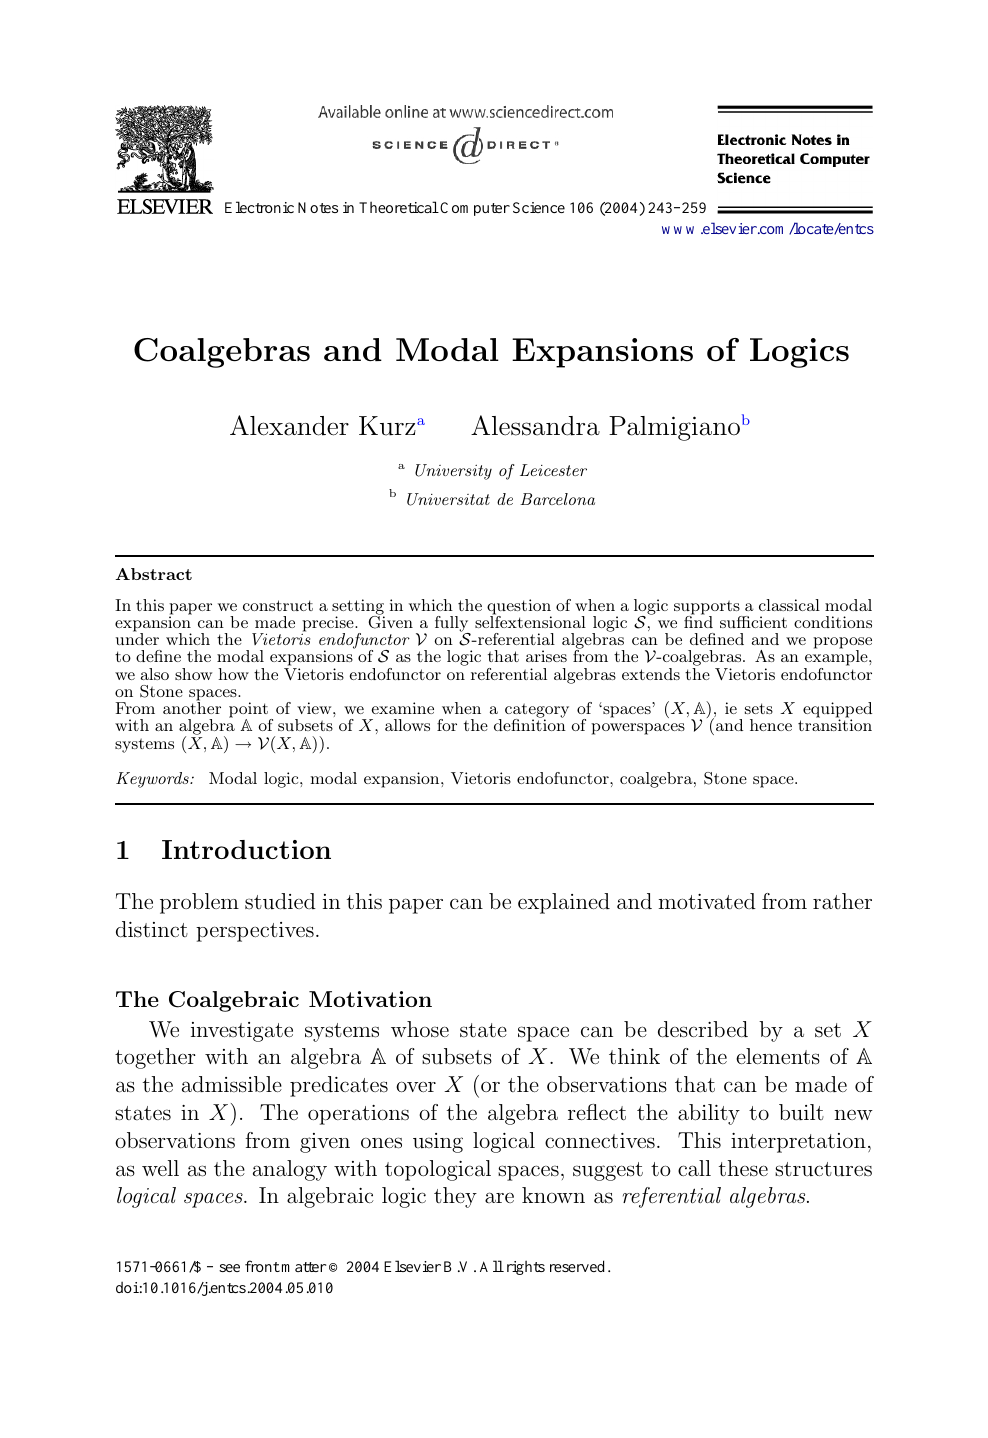 Coalgebras And Modal Expansions Of Logics Topic Of Research Paper In Computer And Information Sciences Download Scholarly Article Pdf And Read For Free On Cyberleninka Open Science Hub